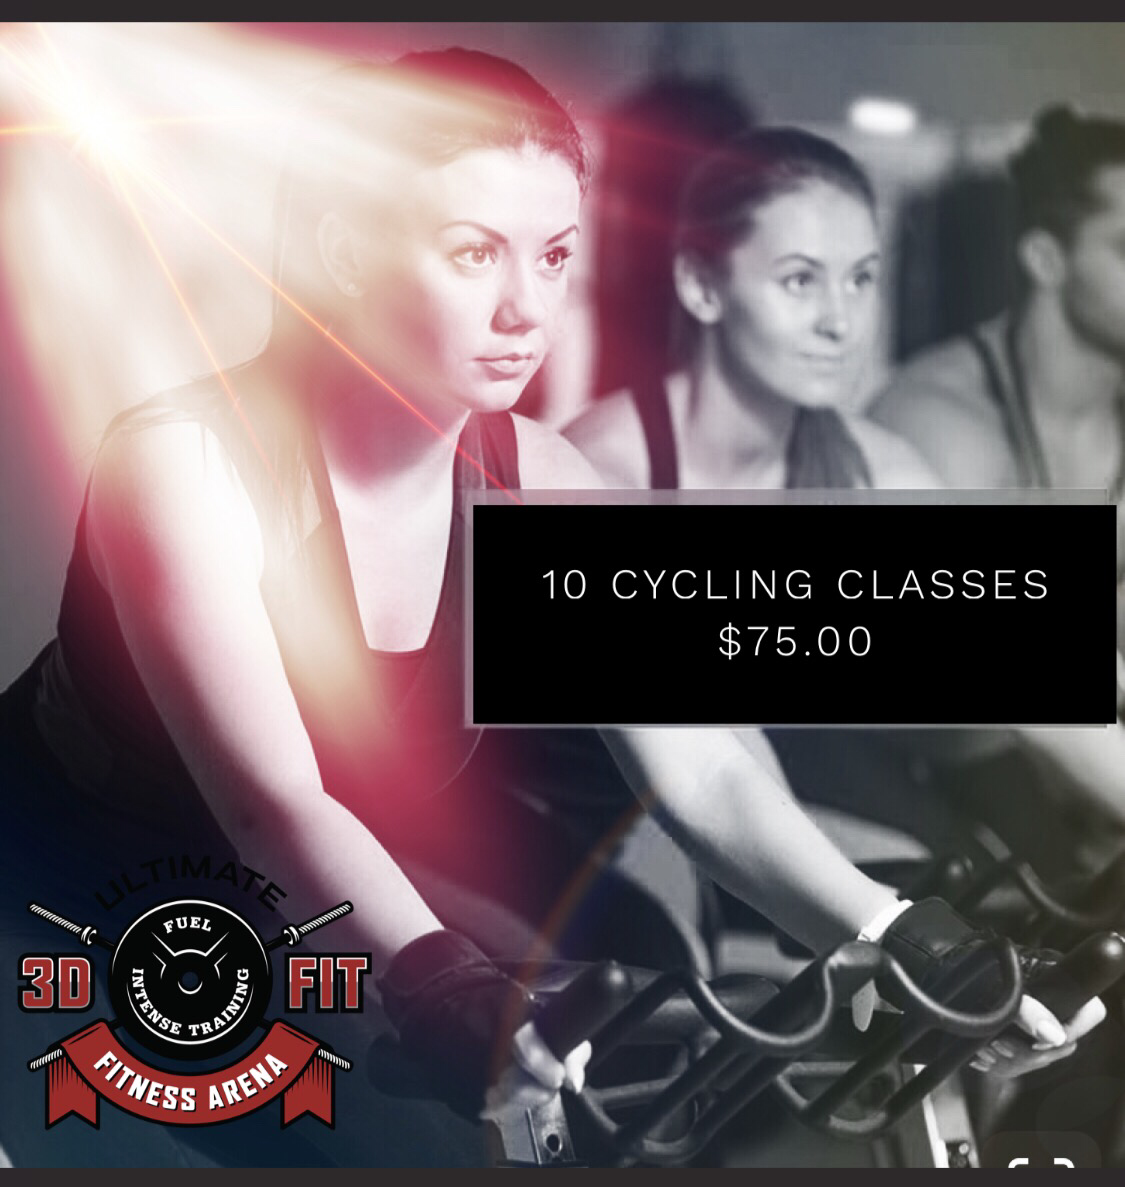 Cycling classes 10 for $75.00